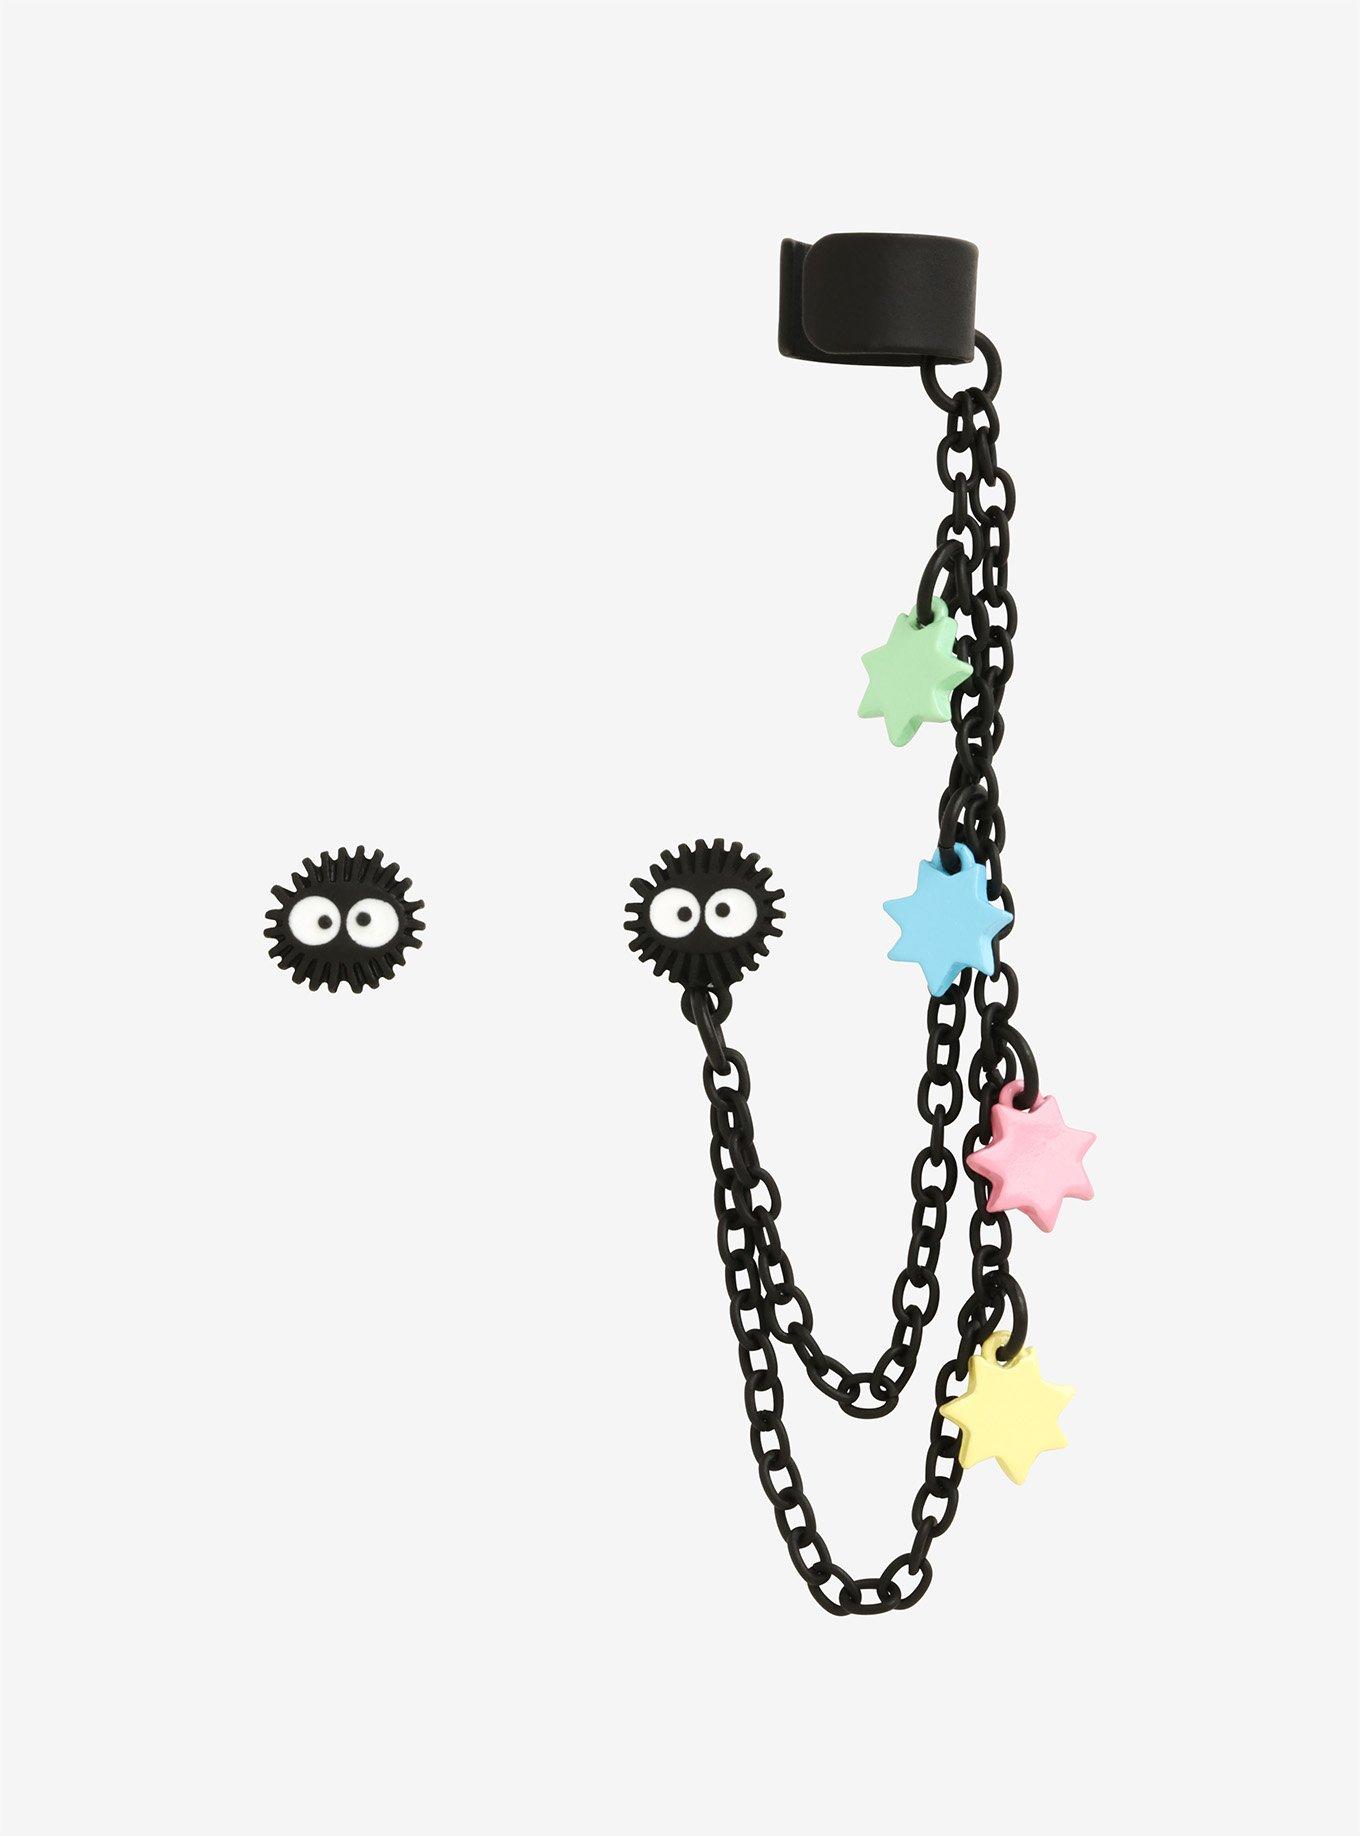 Metal Cartoon Soot Sprite Earrings Gifts for Women and Girls